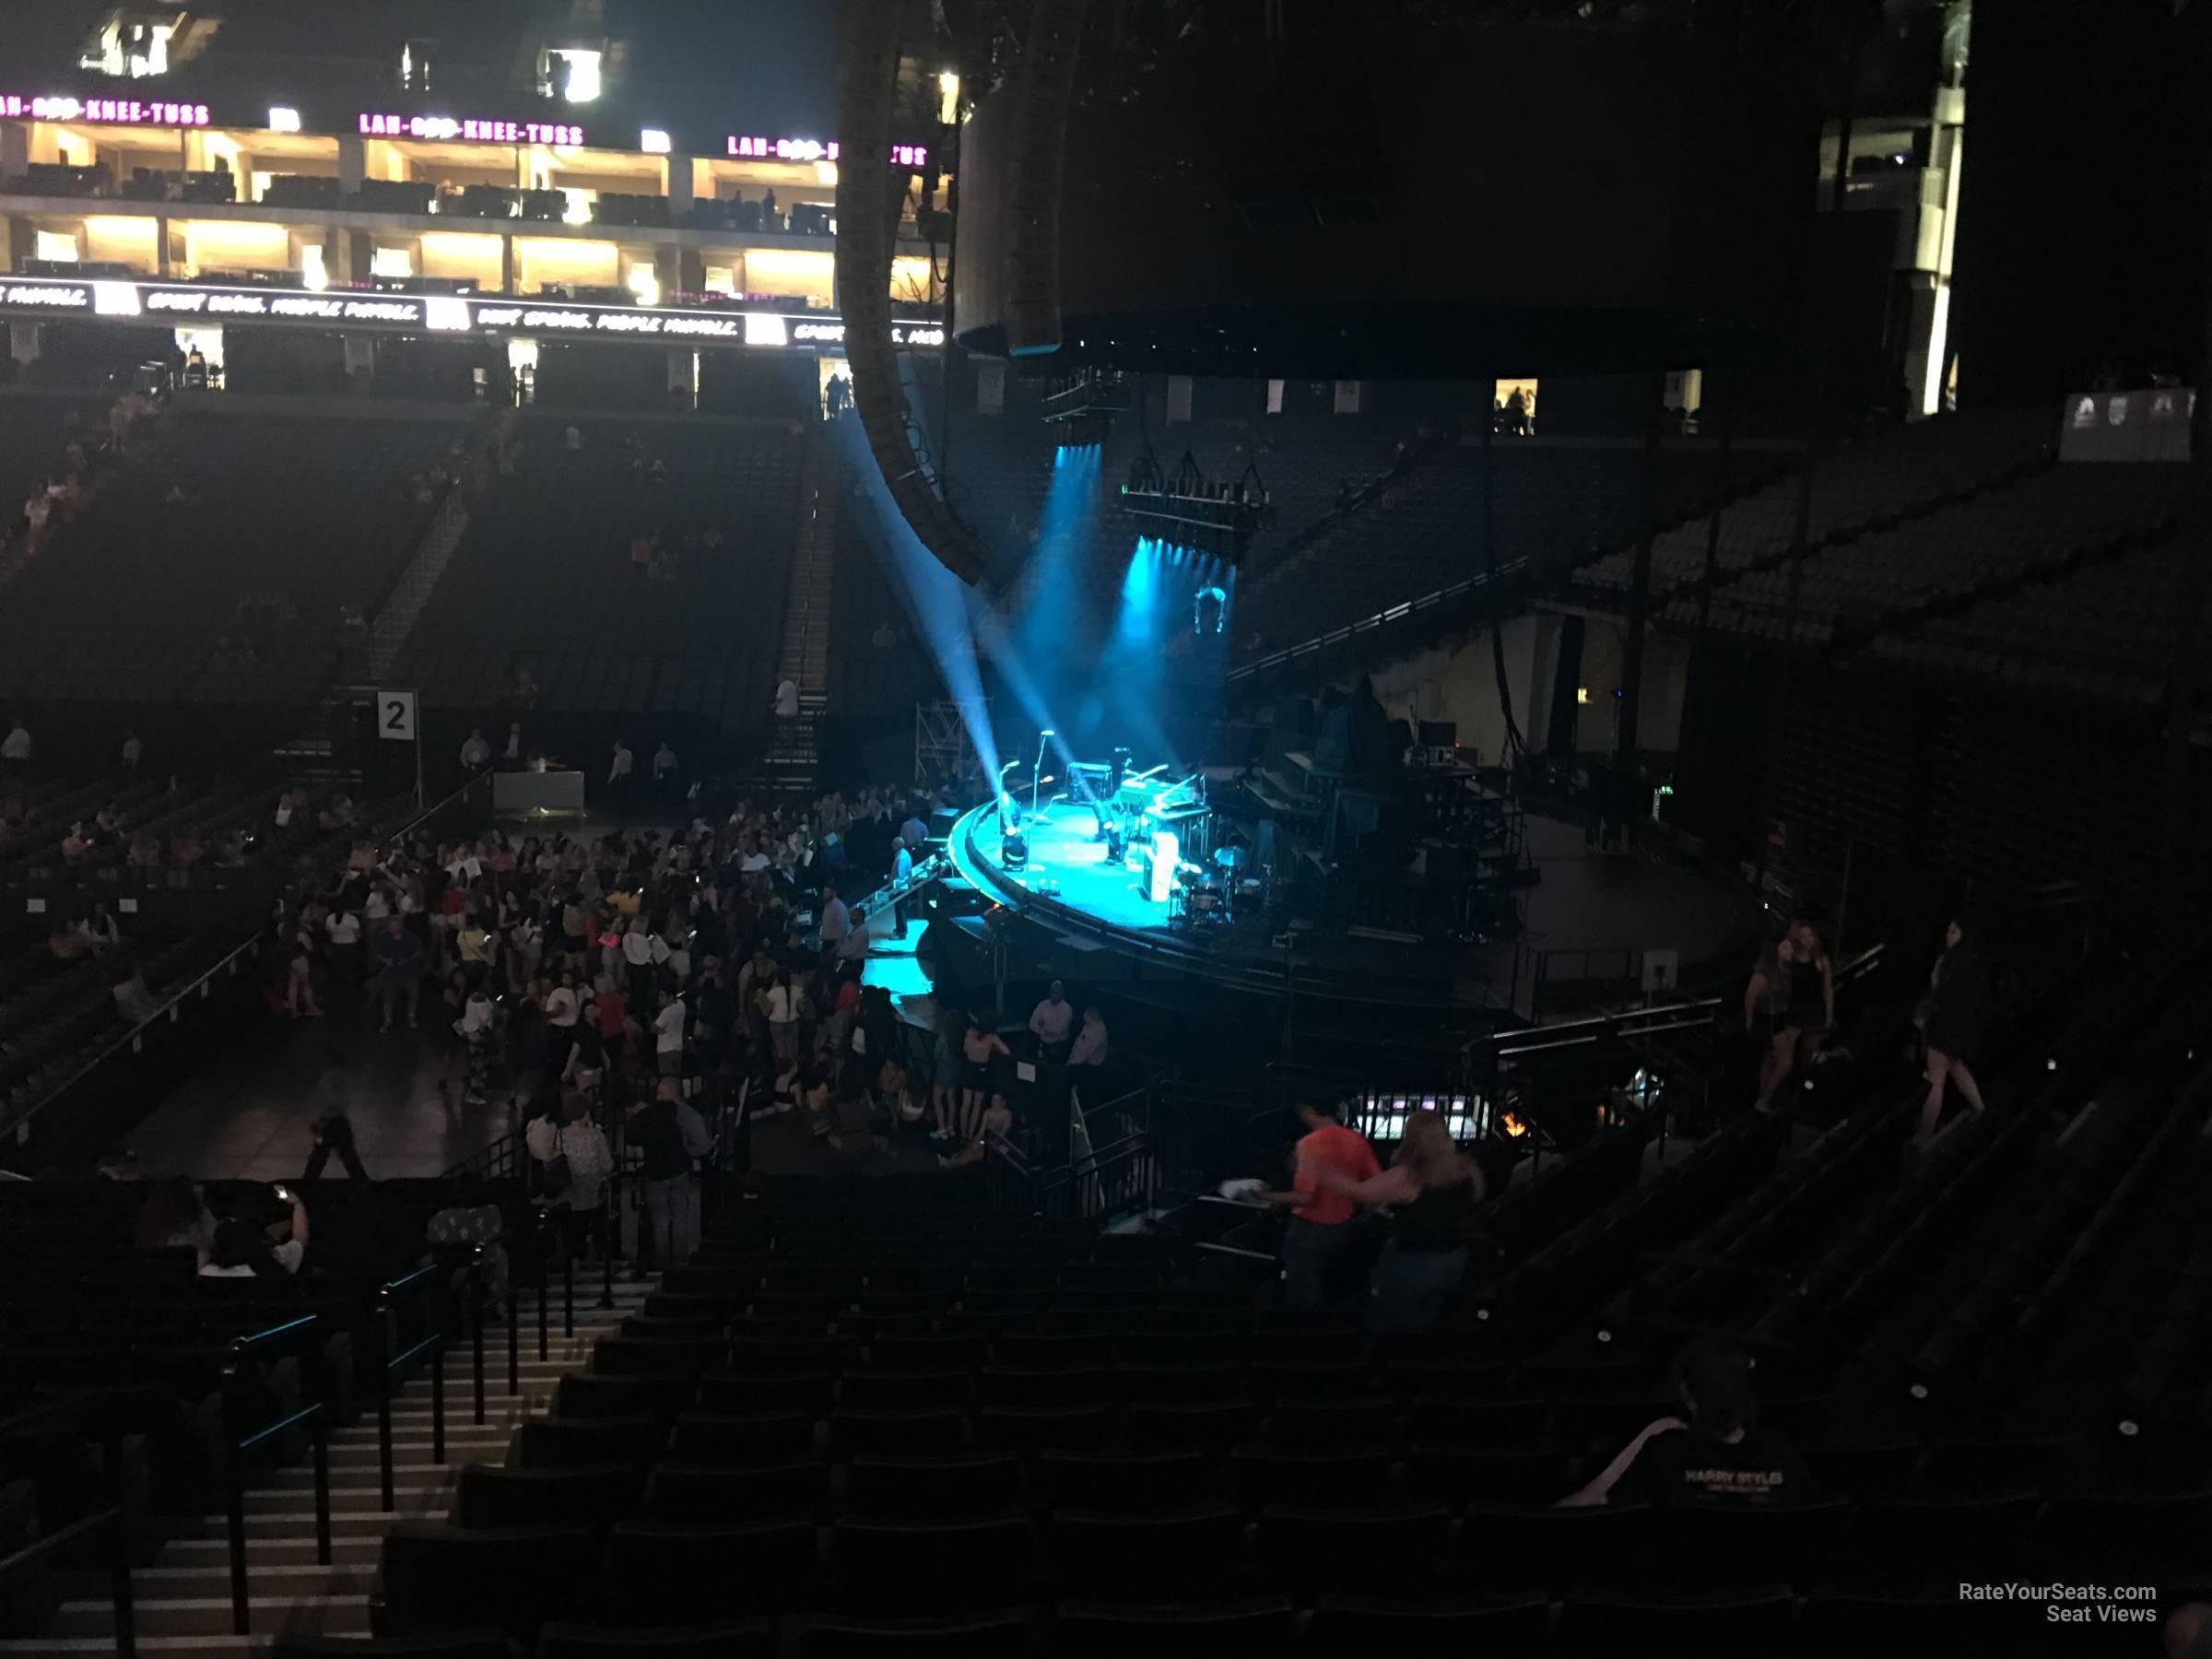 section 105, row m seat view  for concert - golden 1 center